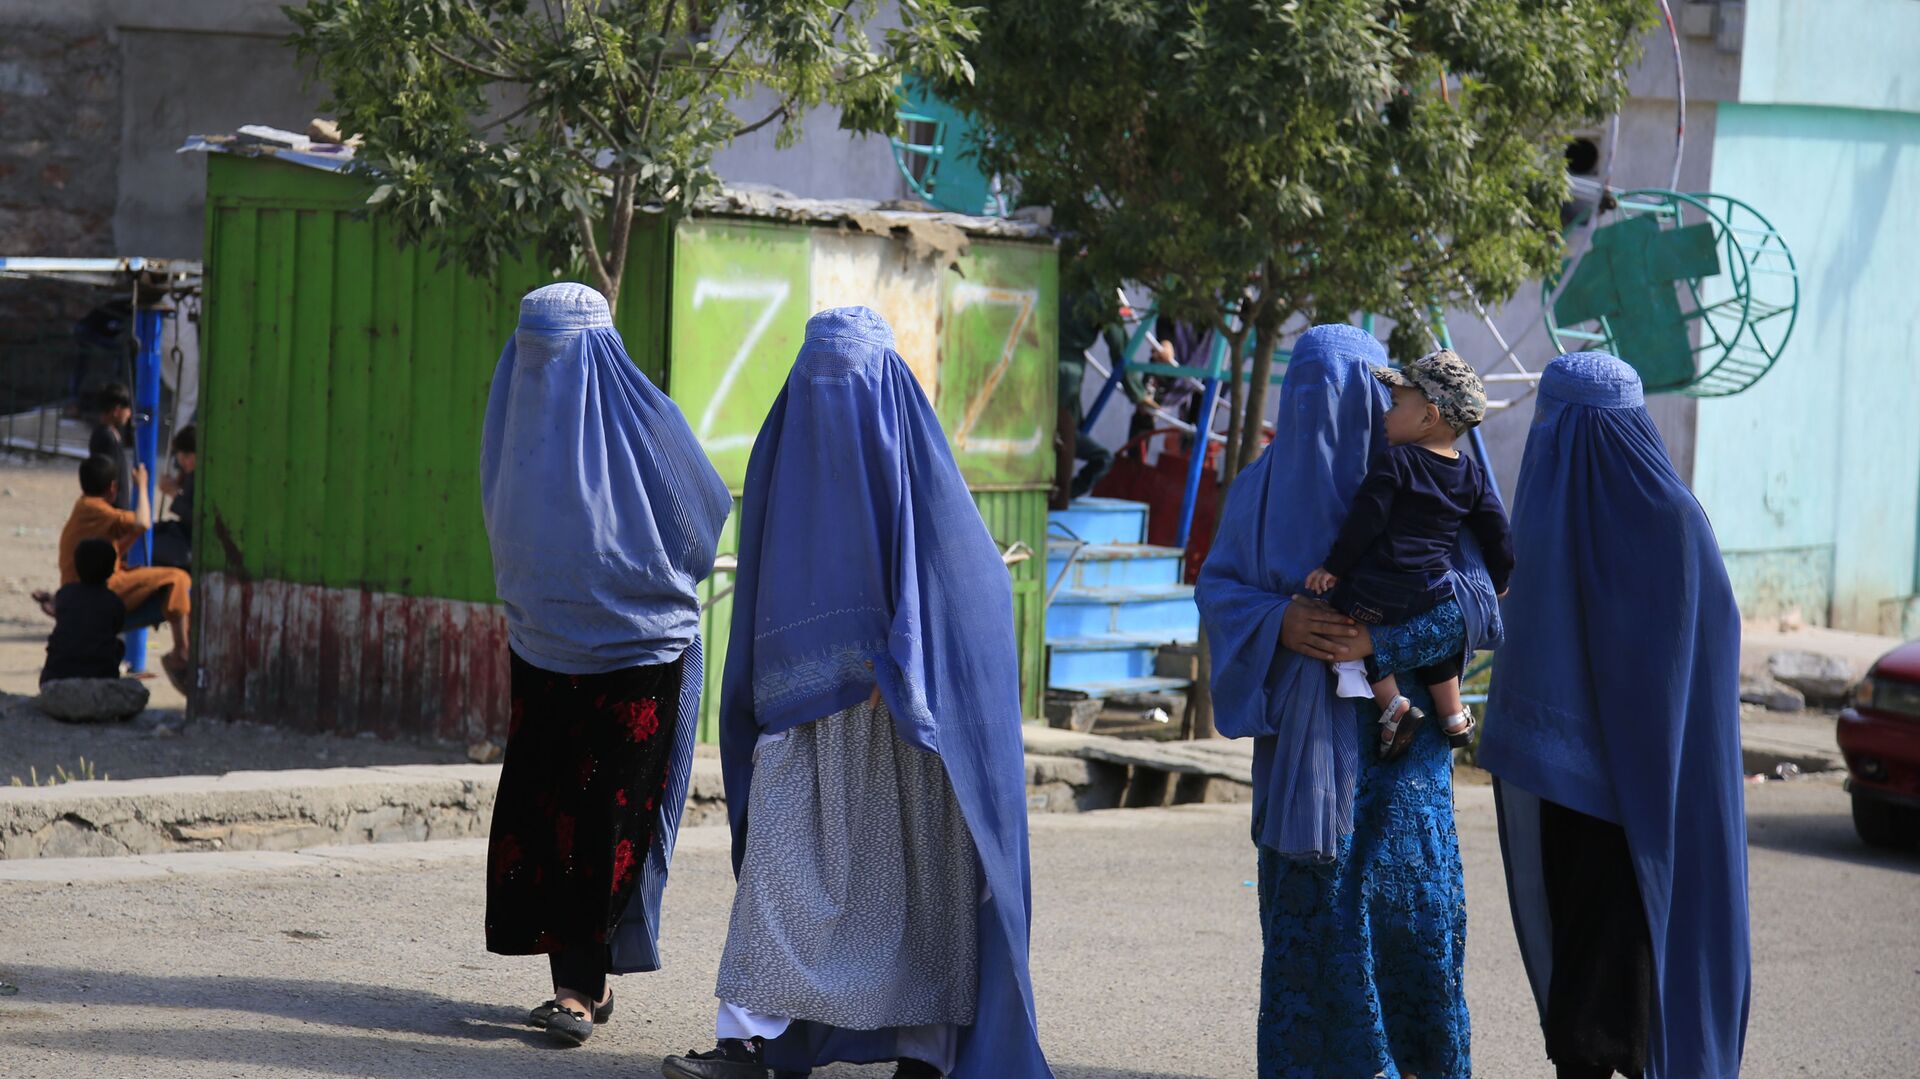 Afghan women walk on the road during the first day of Eid al-Fitr in Kabul, Afghanistan, Thursday, May 13, 2021 - Sputnik International, 1920, 10.09.2021